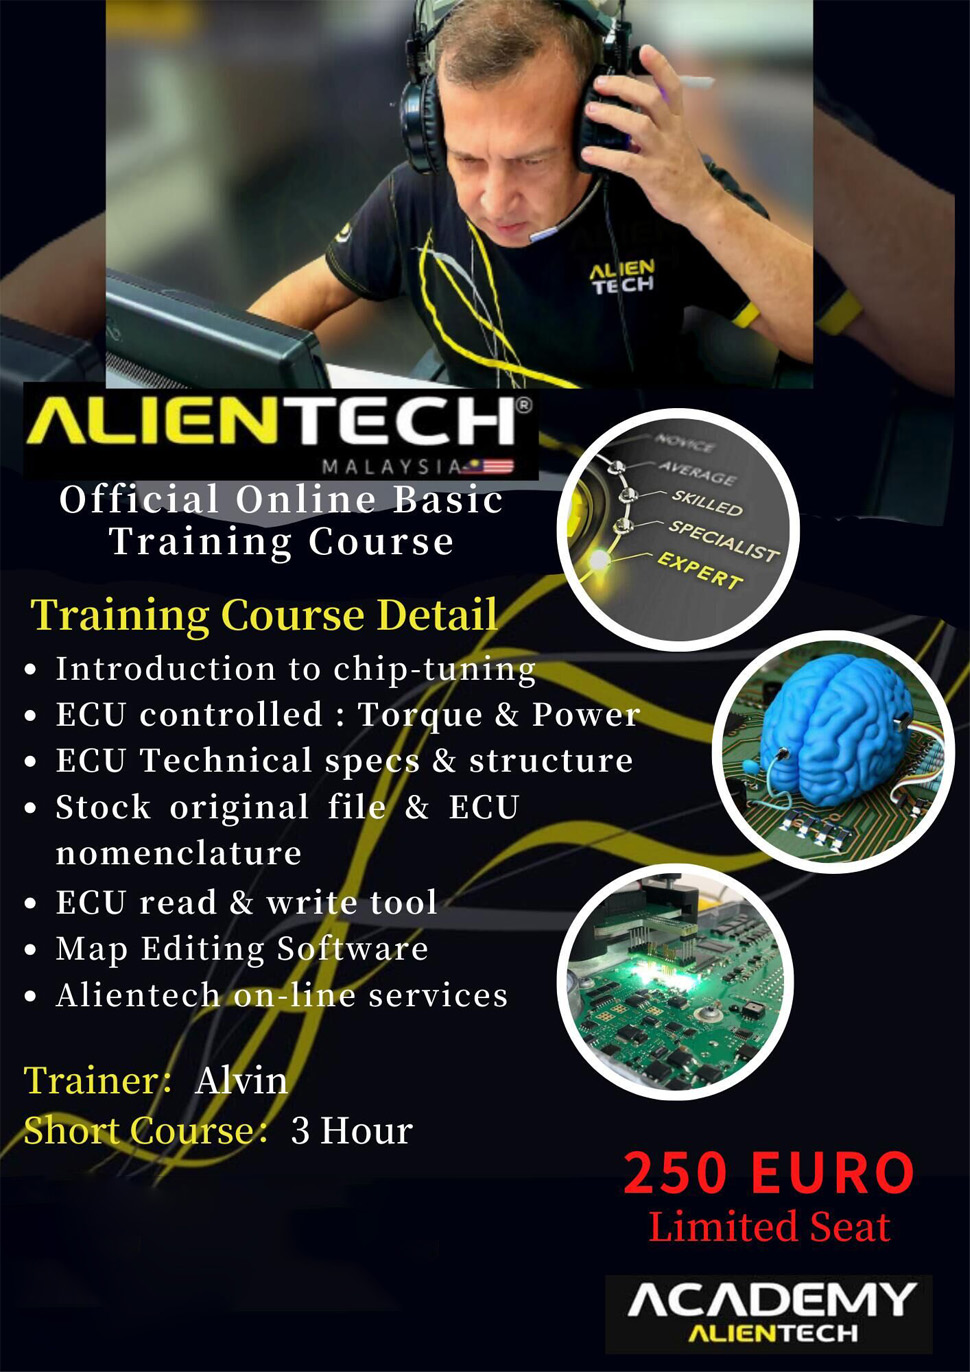 Alientech Official Online Basic Training Course About ECU Chip-tuning